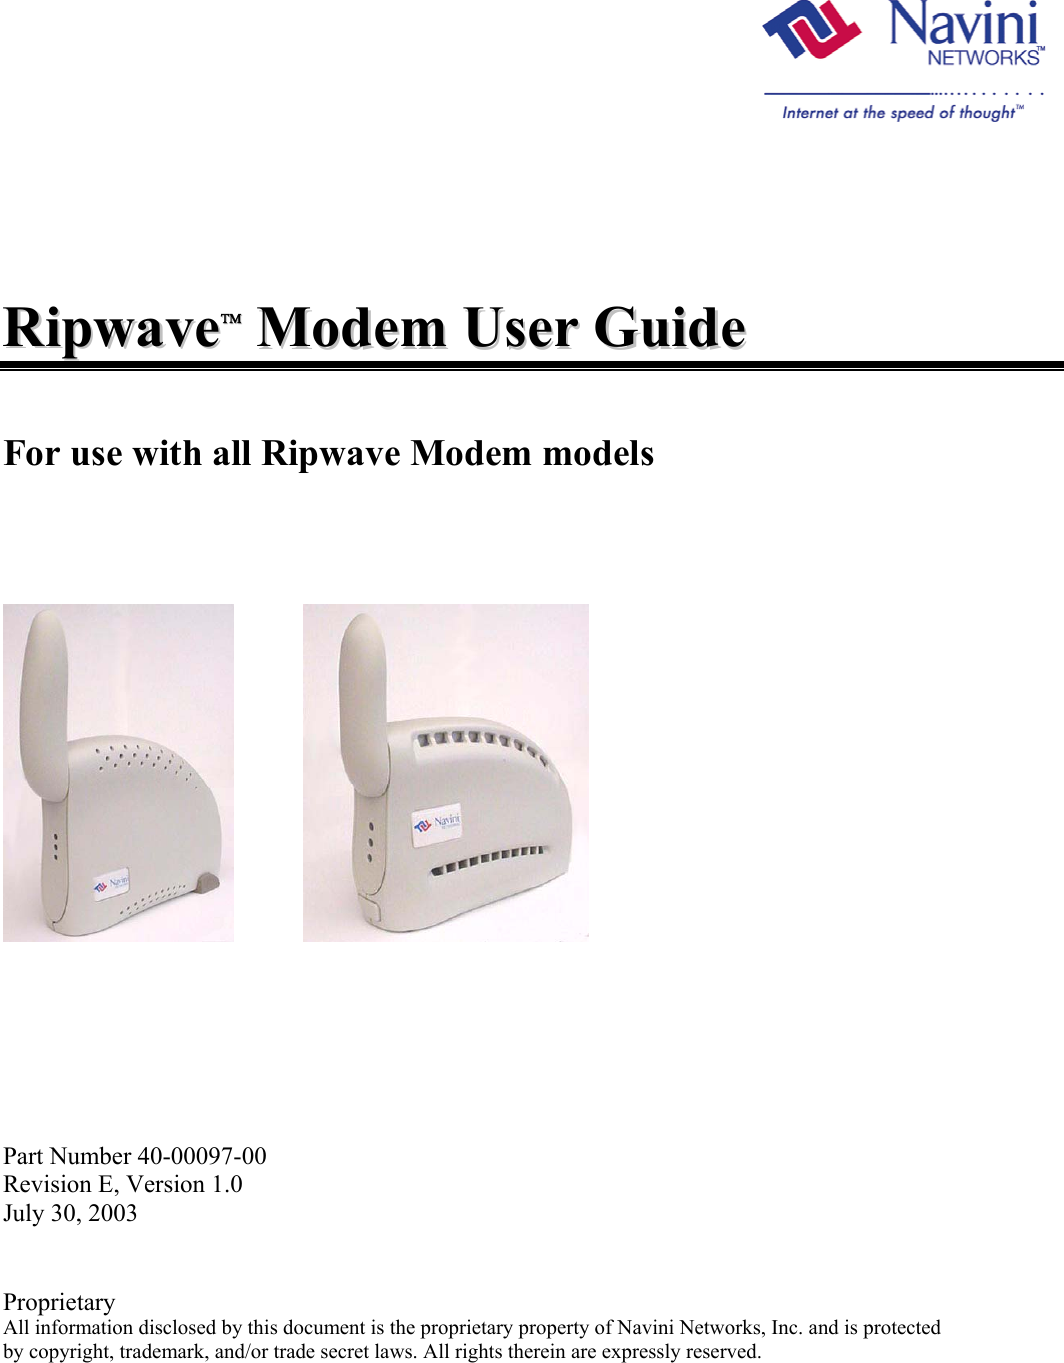          RRiippwwaavvee  MMooddeemm  UUsseerr  GGuuiiddee    For use with all Ripwave Modem models                        Part Number 40-00097-00 Revision E, Version 1.0 July 30, 2003   Proprietary All information disclosed by this document is the proprietary property of Navini Networks, Inc. and is protected  by copyright, trademark, and/or trade secret laws. All rights therein are expressly reserved.   